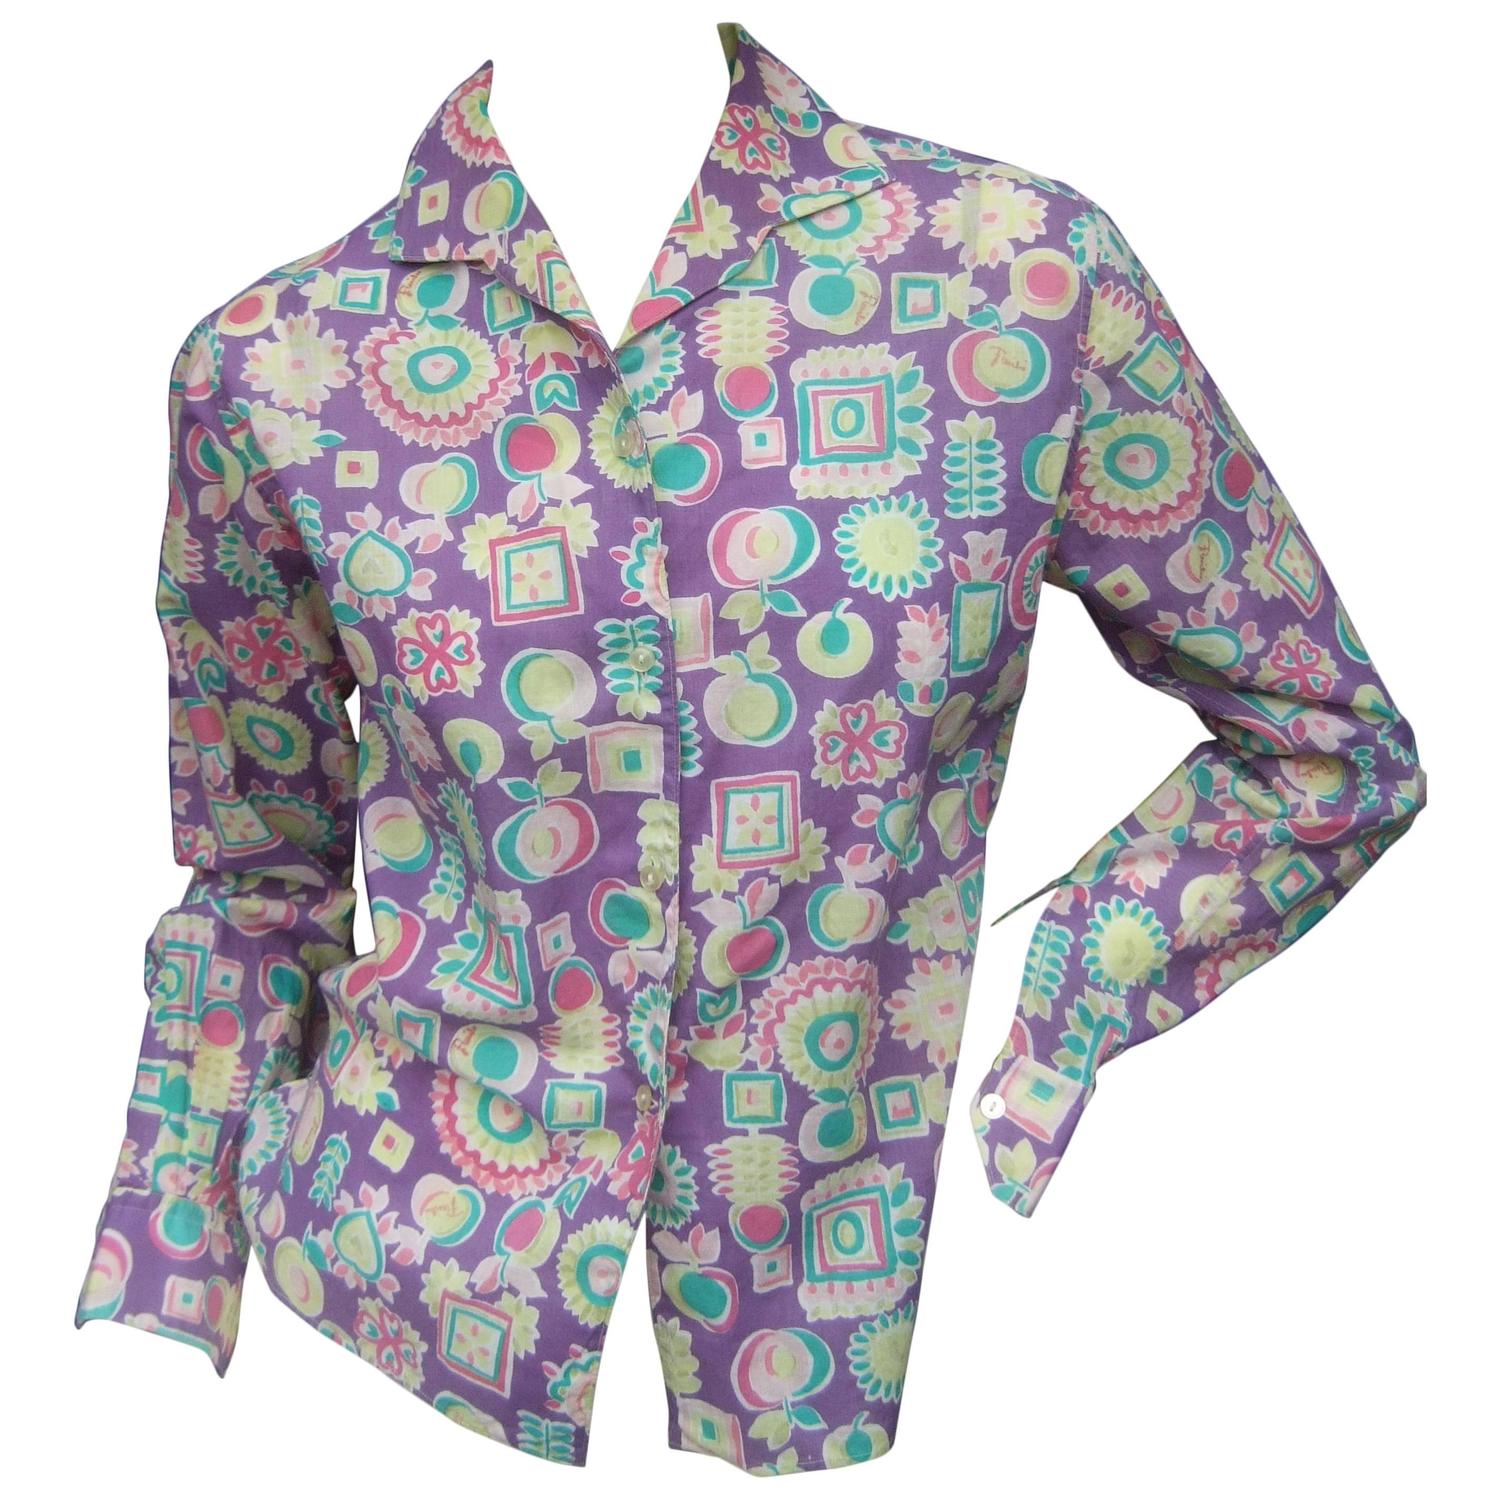 Emilio Pucci Cotton Pastel Print Blouse Made in Italy c 1970 For Sale ...